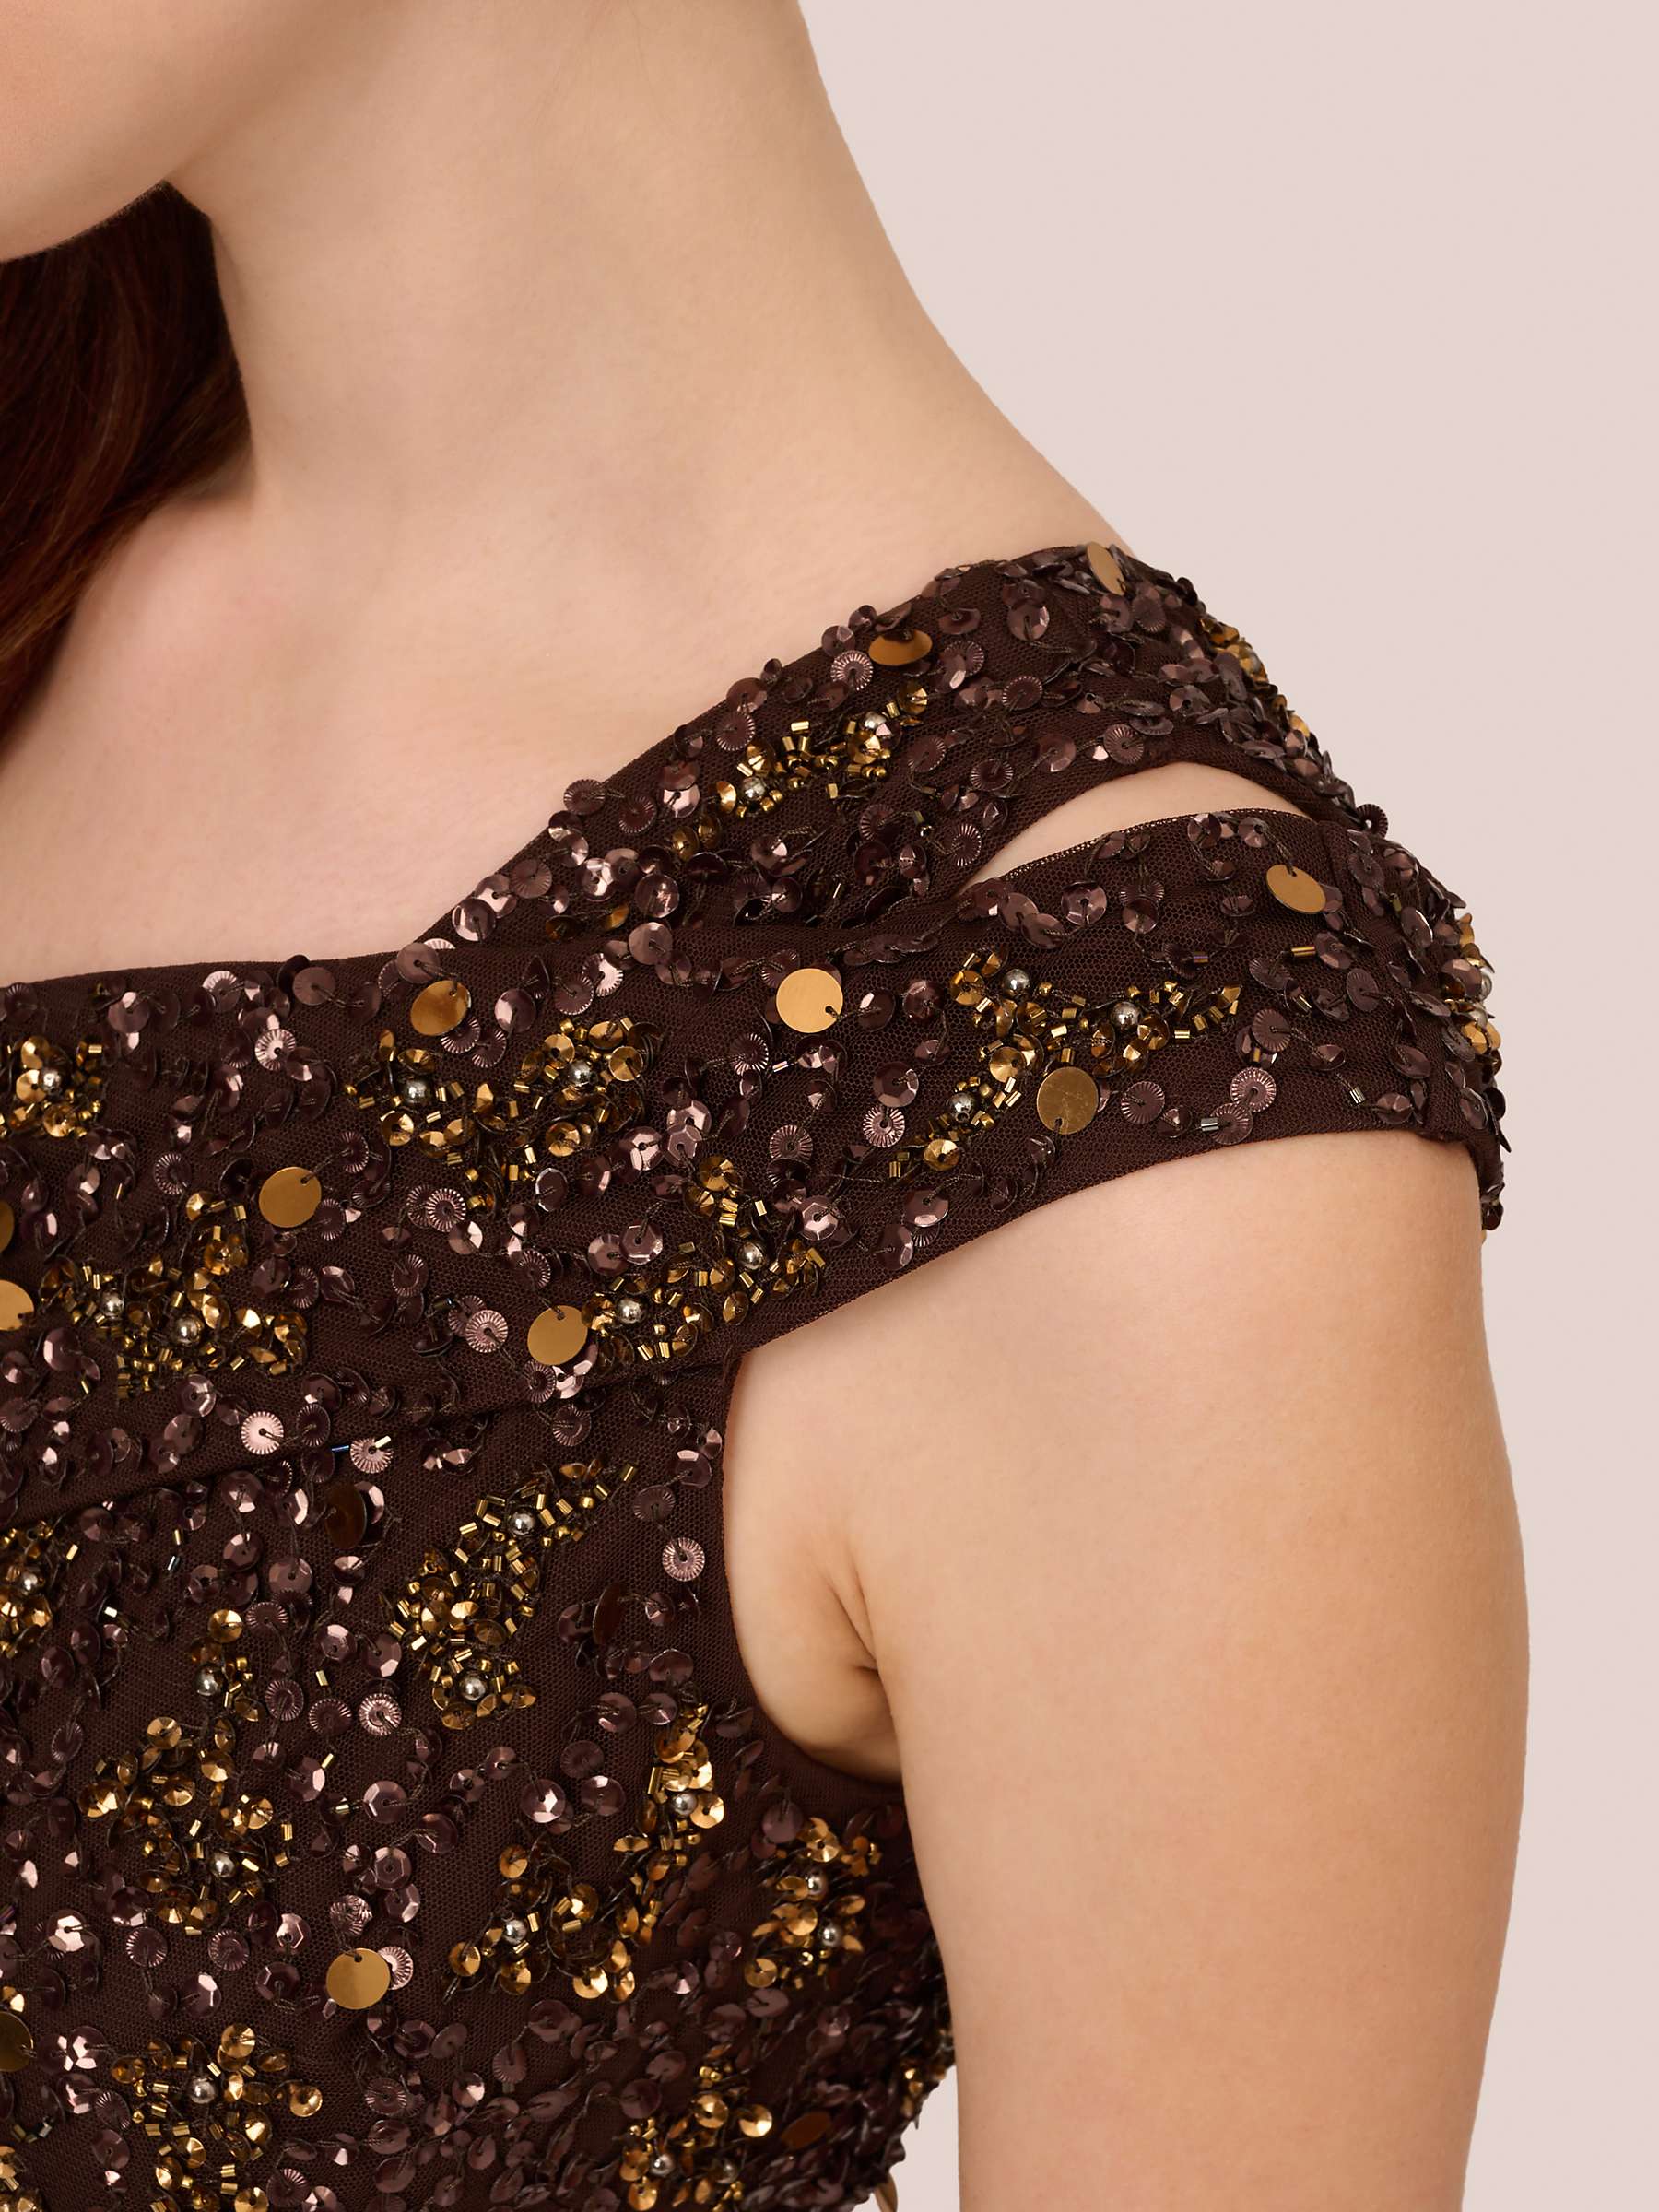 Buy Adrianna Papell Beaded One Shoulder Maxi Dress, Chocolate Online at johnlewis.com